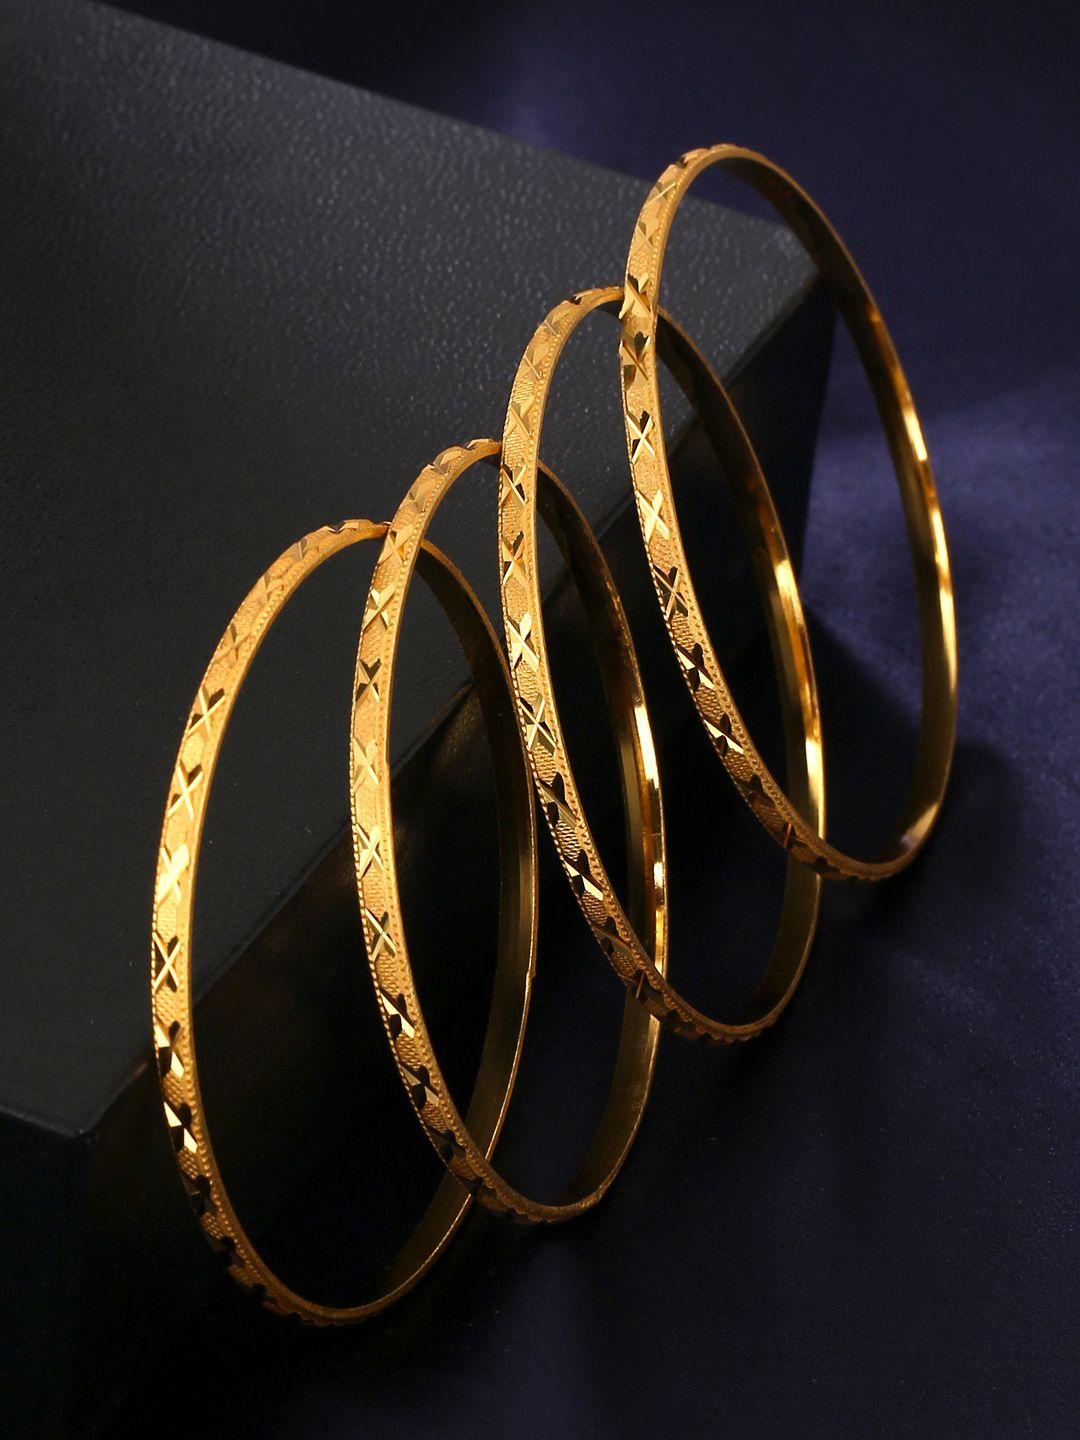 yellow chimes set of 4 gold-plated  handcrafted bangles